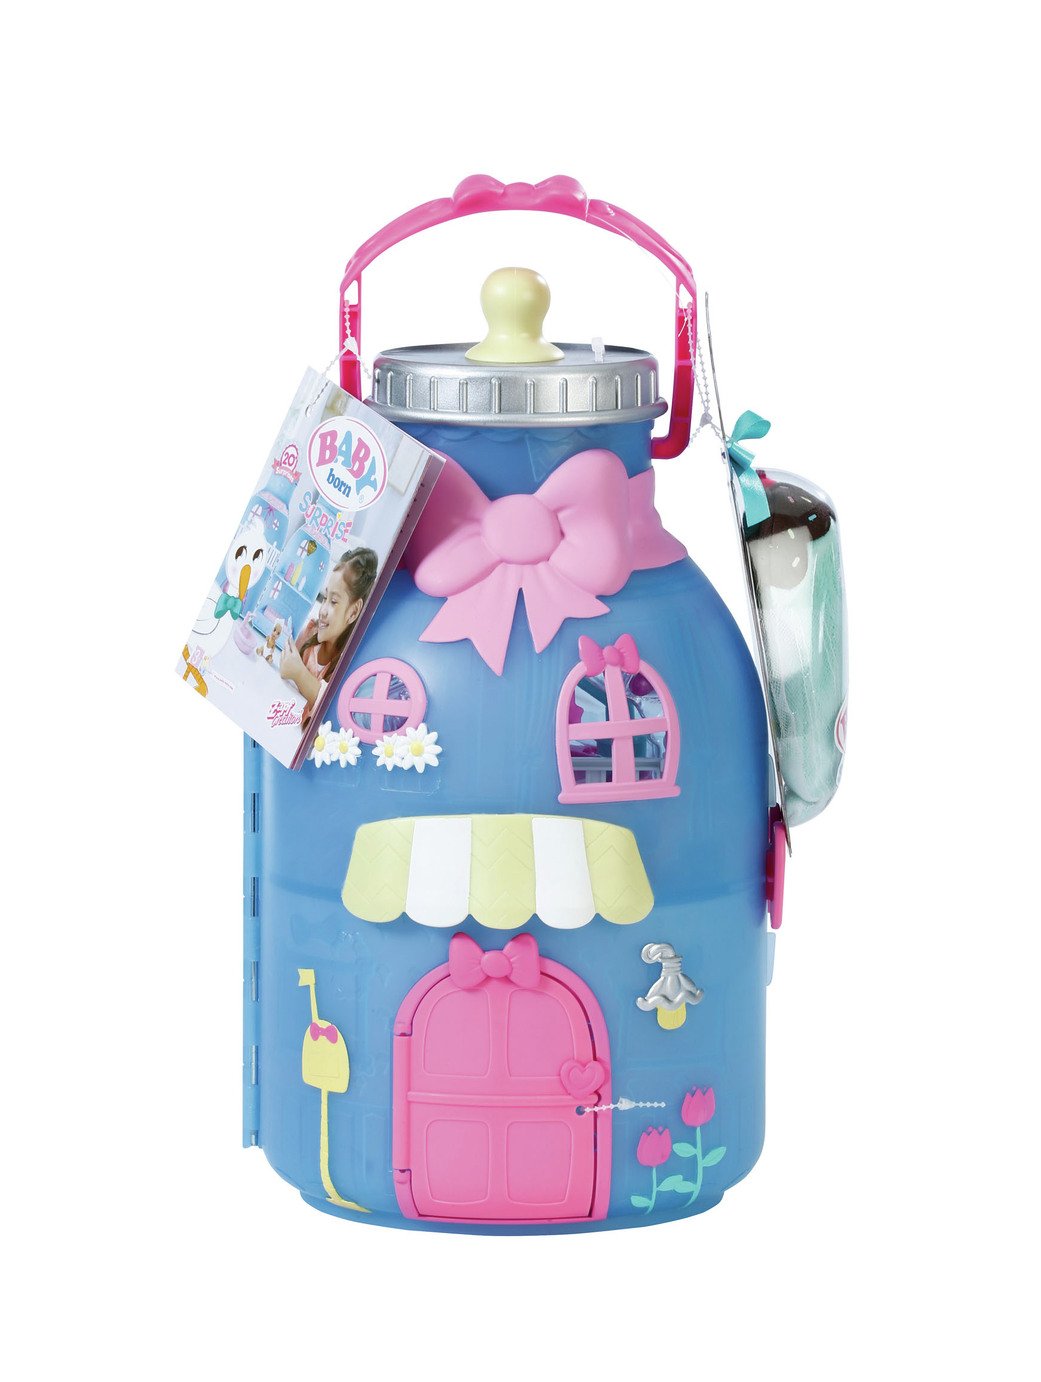 BABY born Surprise Baby Bottle House Review